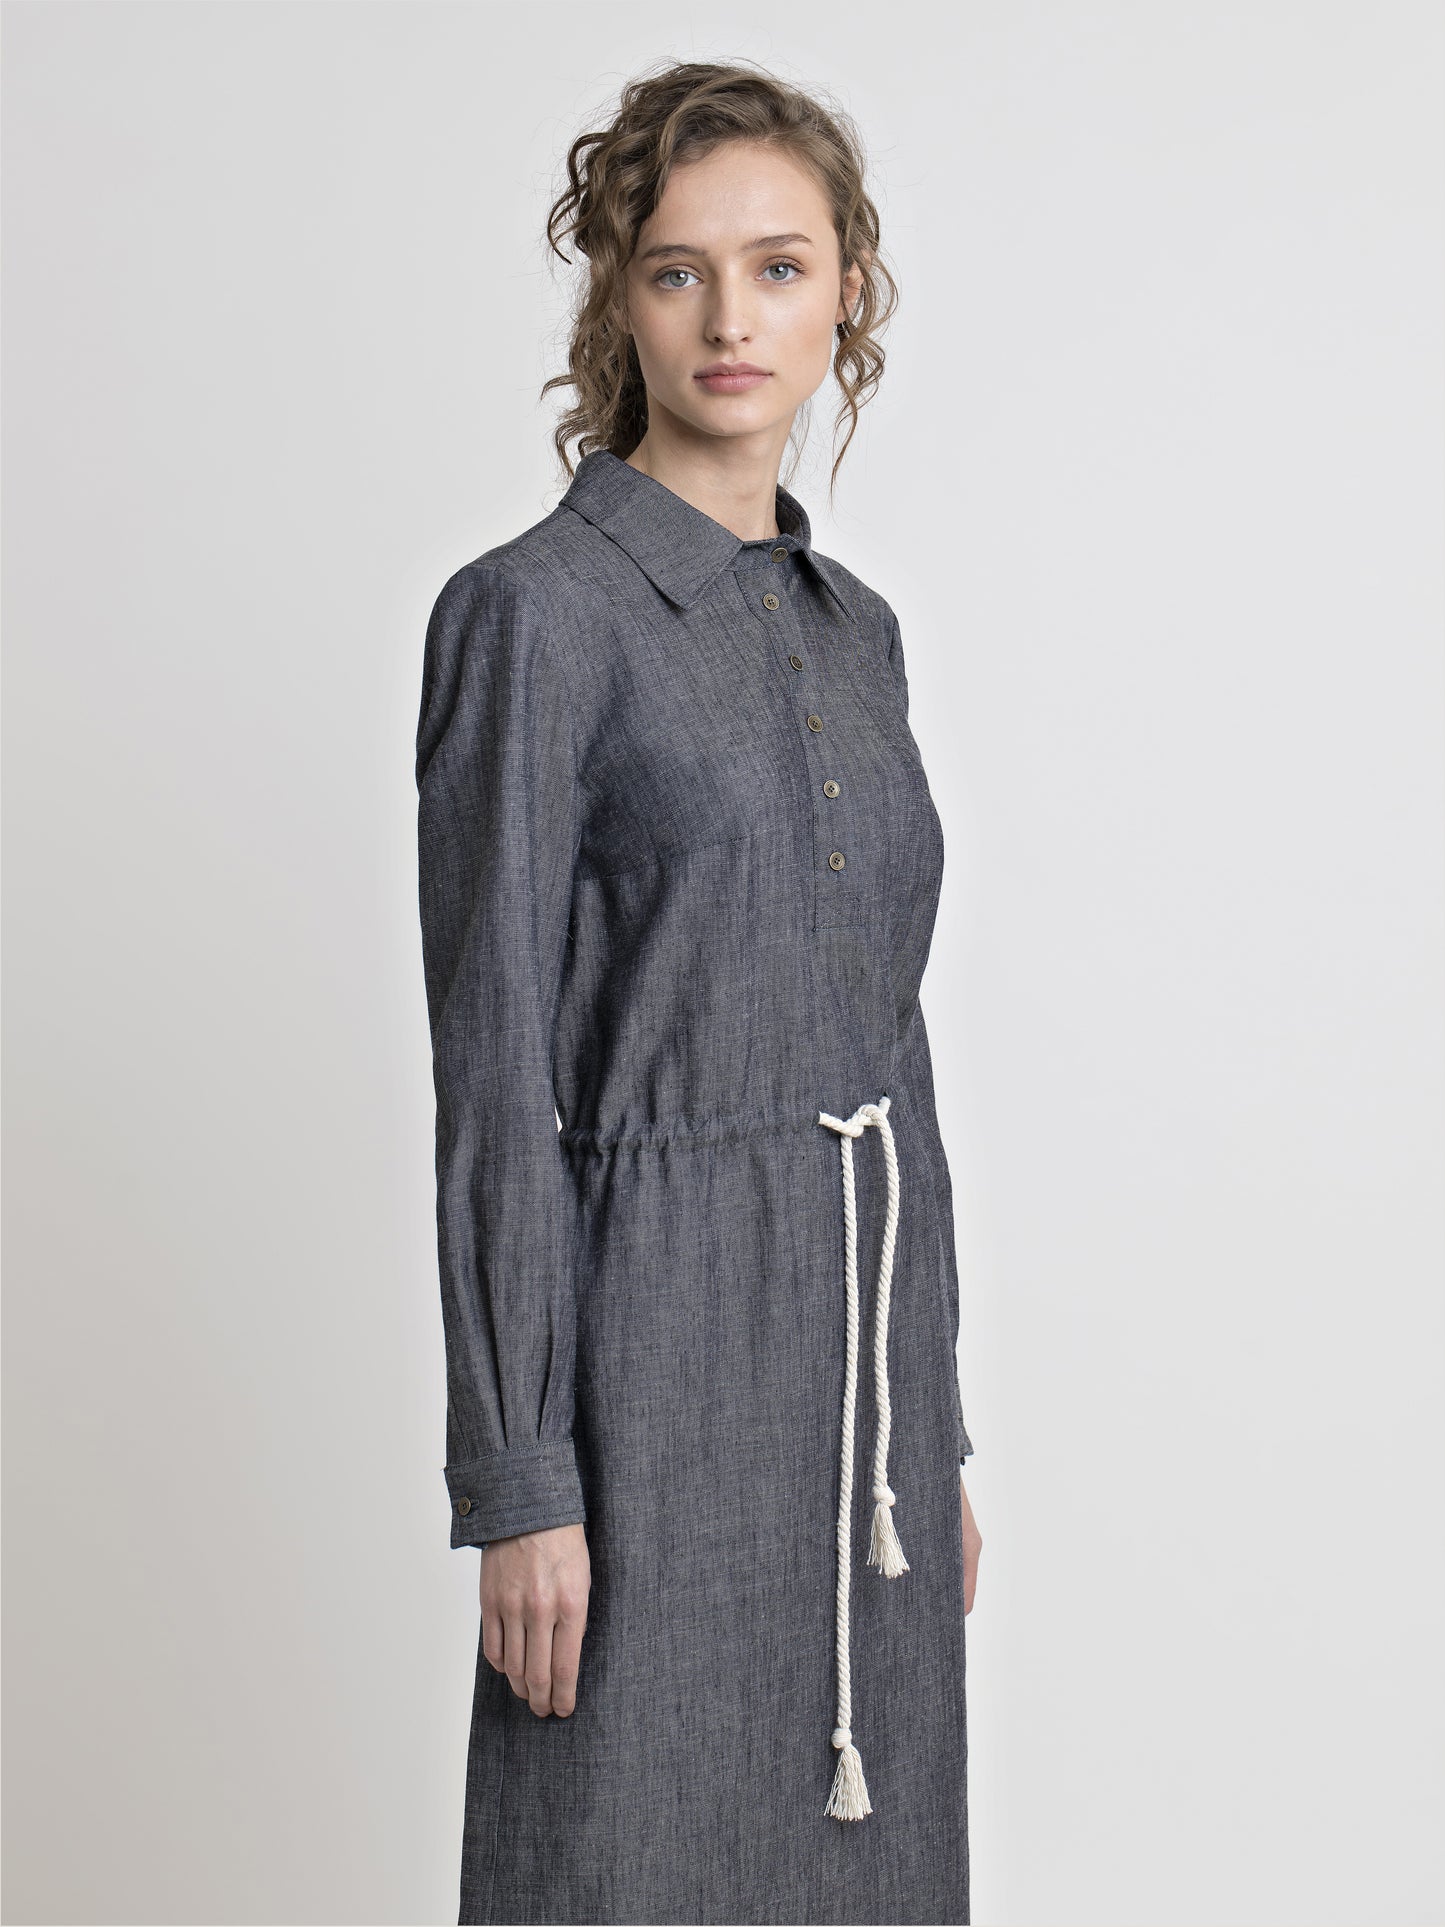 3/4 view of a female model wearing long sleeve straight cut denim shirt dress with drawstring inserted belt. From the RÉZO women's collection.